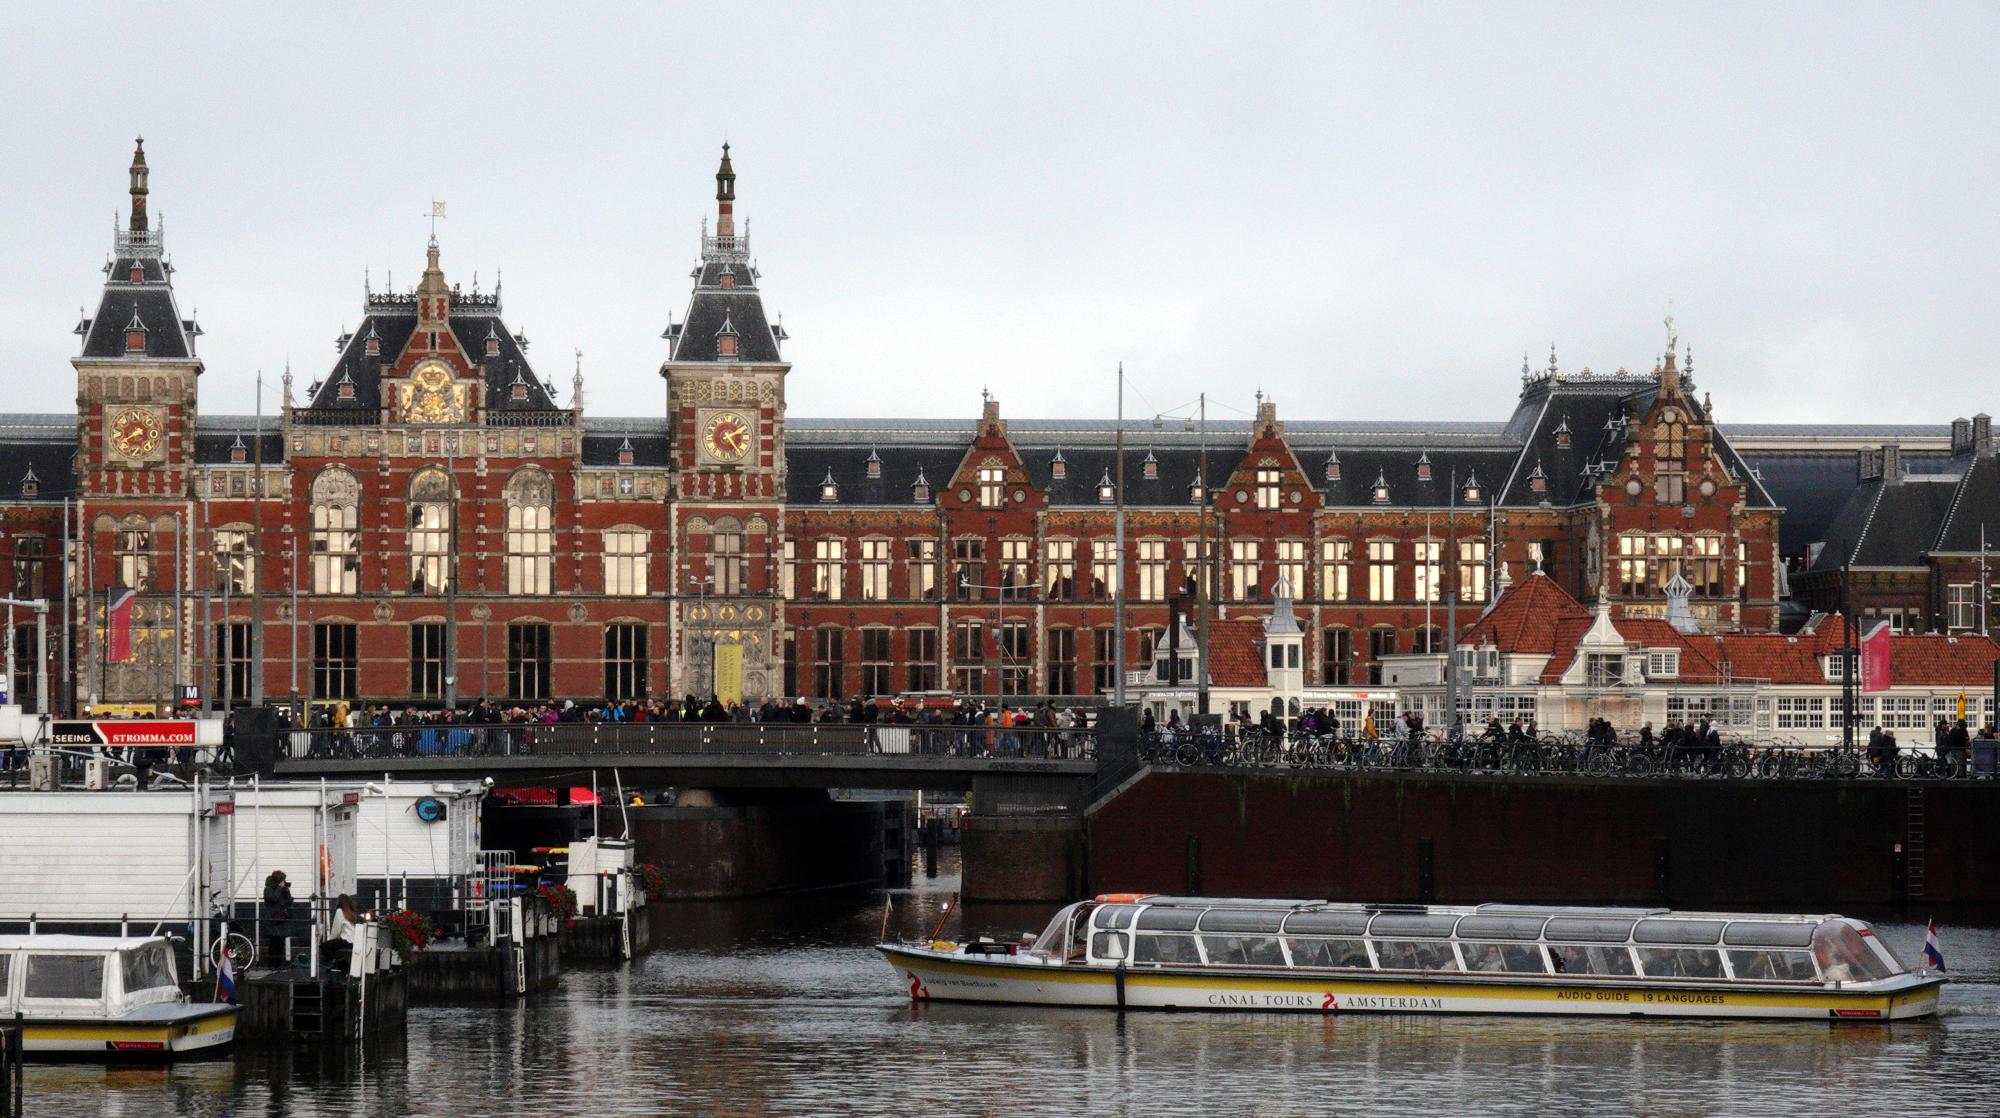 The Netherlands - Centraal